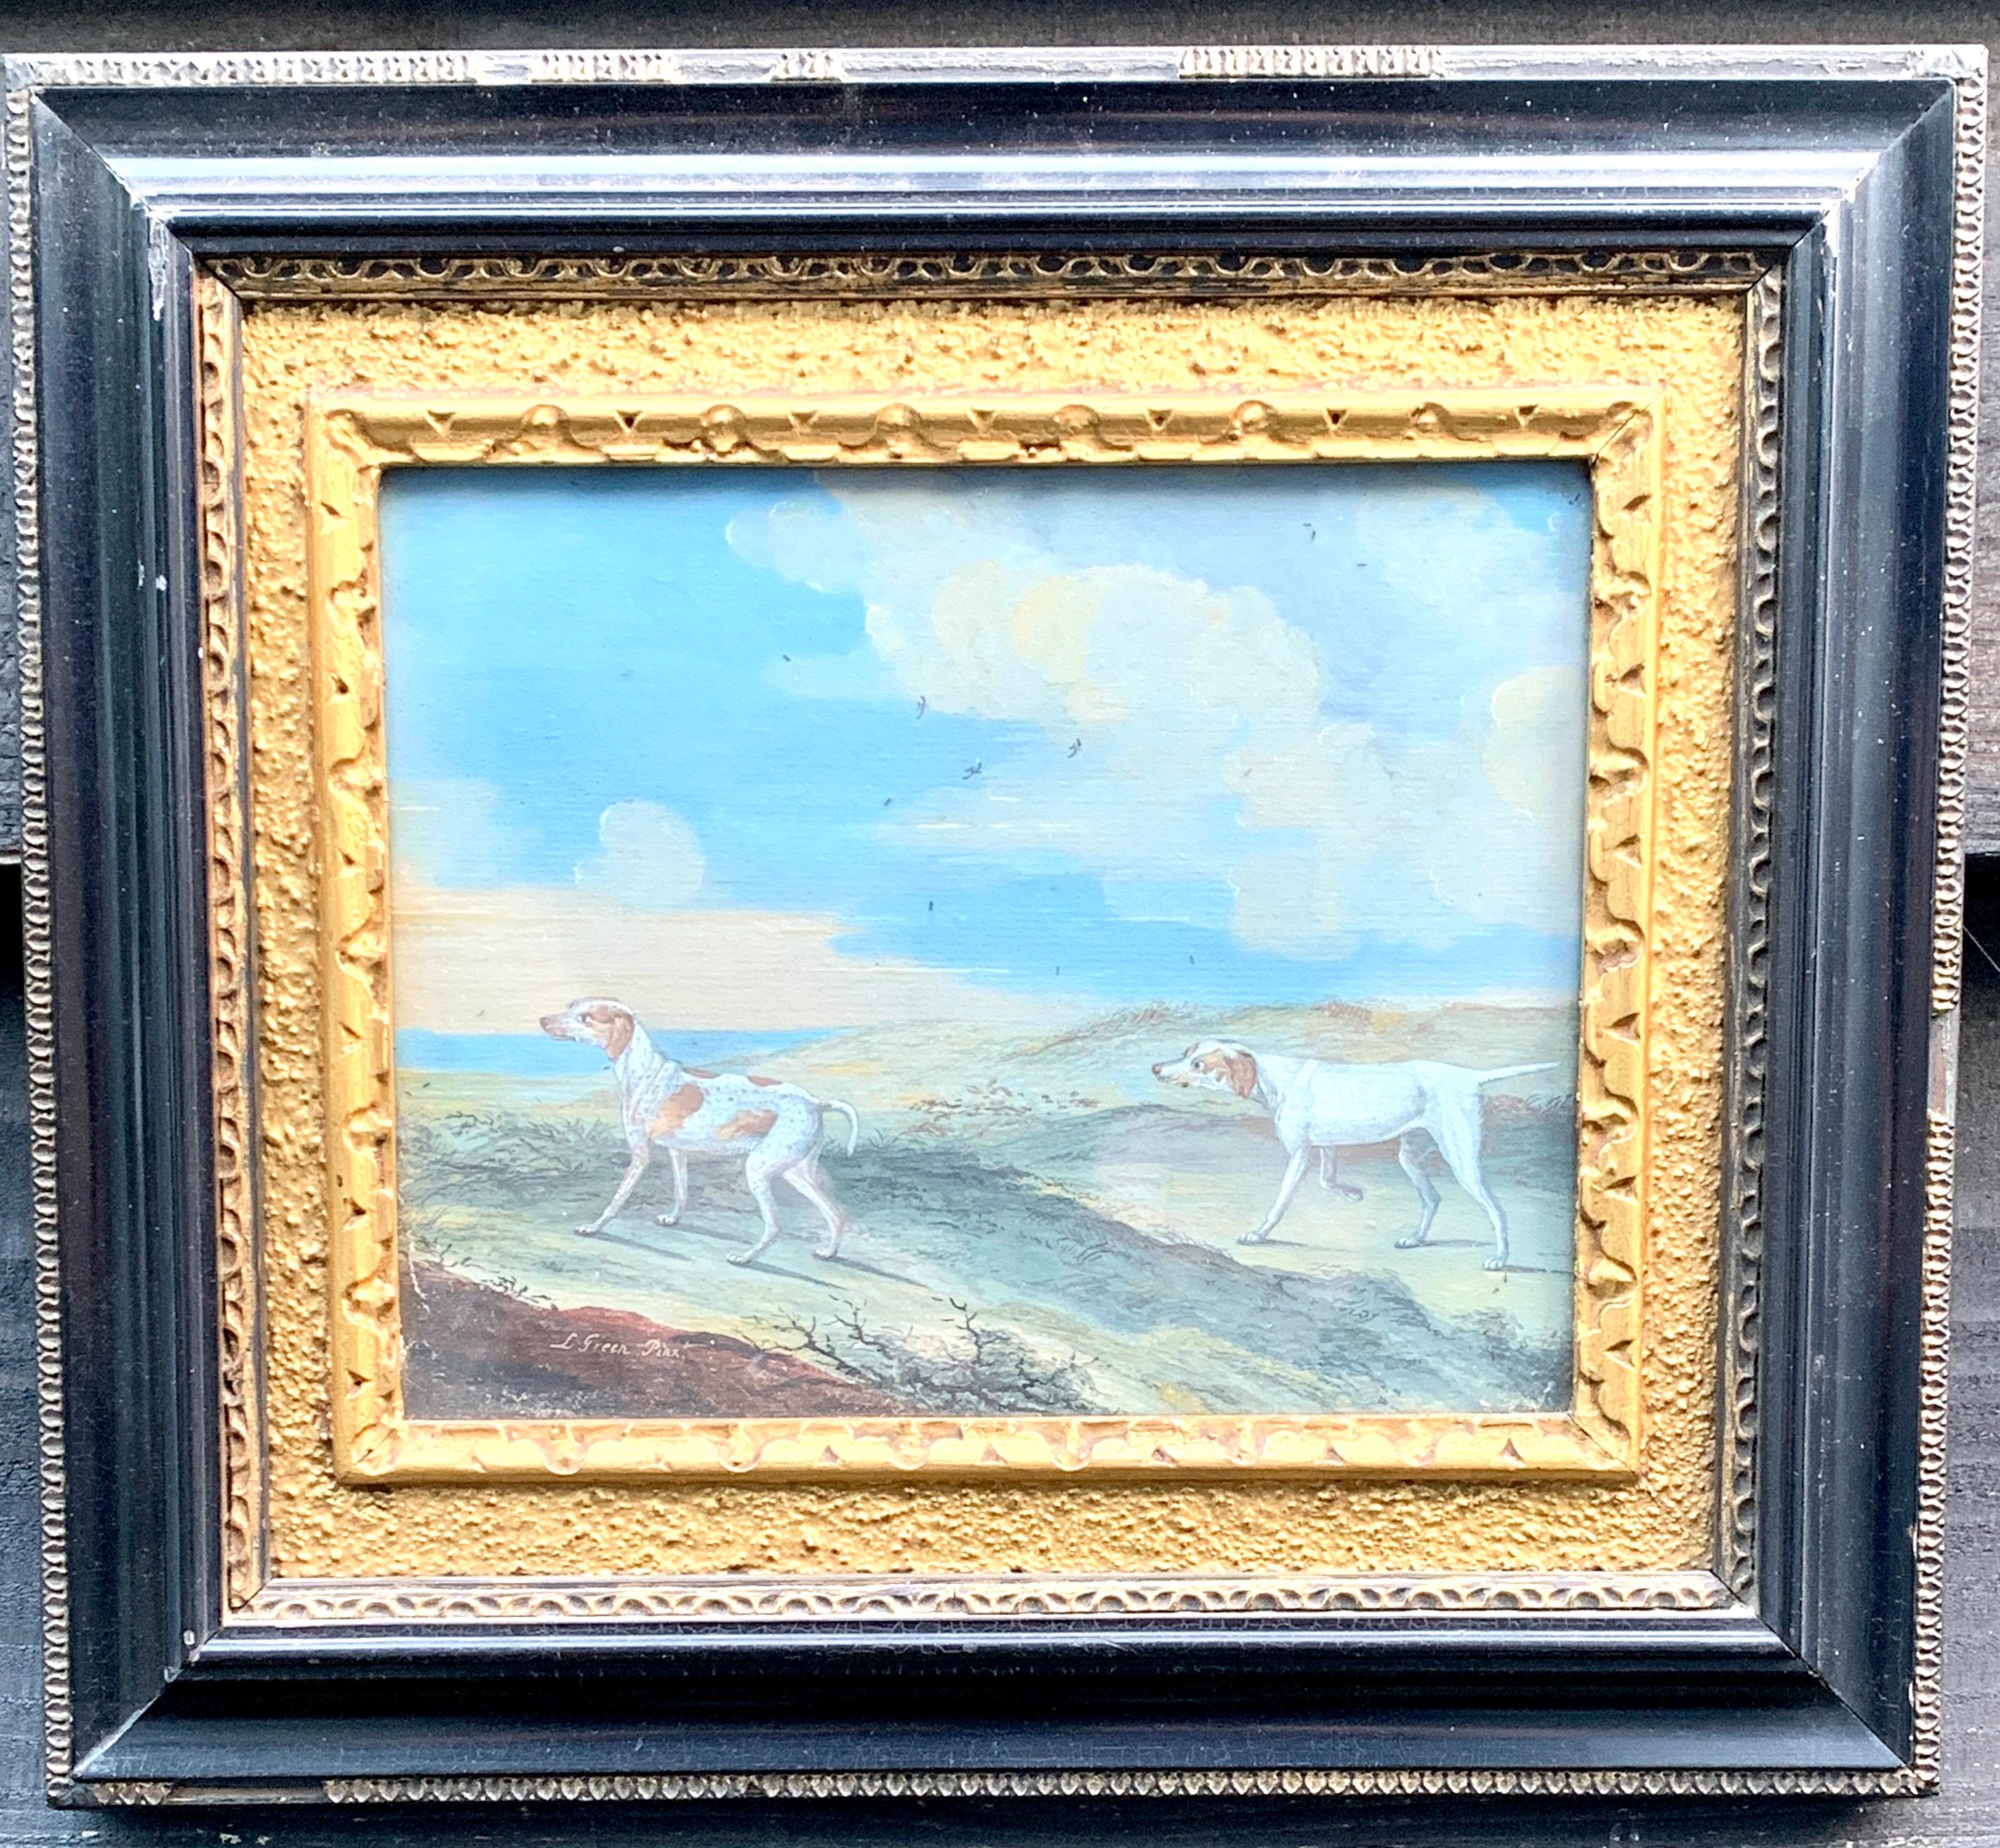 L.Green Figurative Painting - 18th century English scene of pointer dogs out hunting with men shooting birds